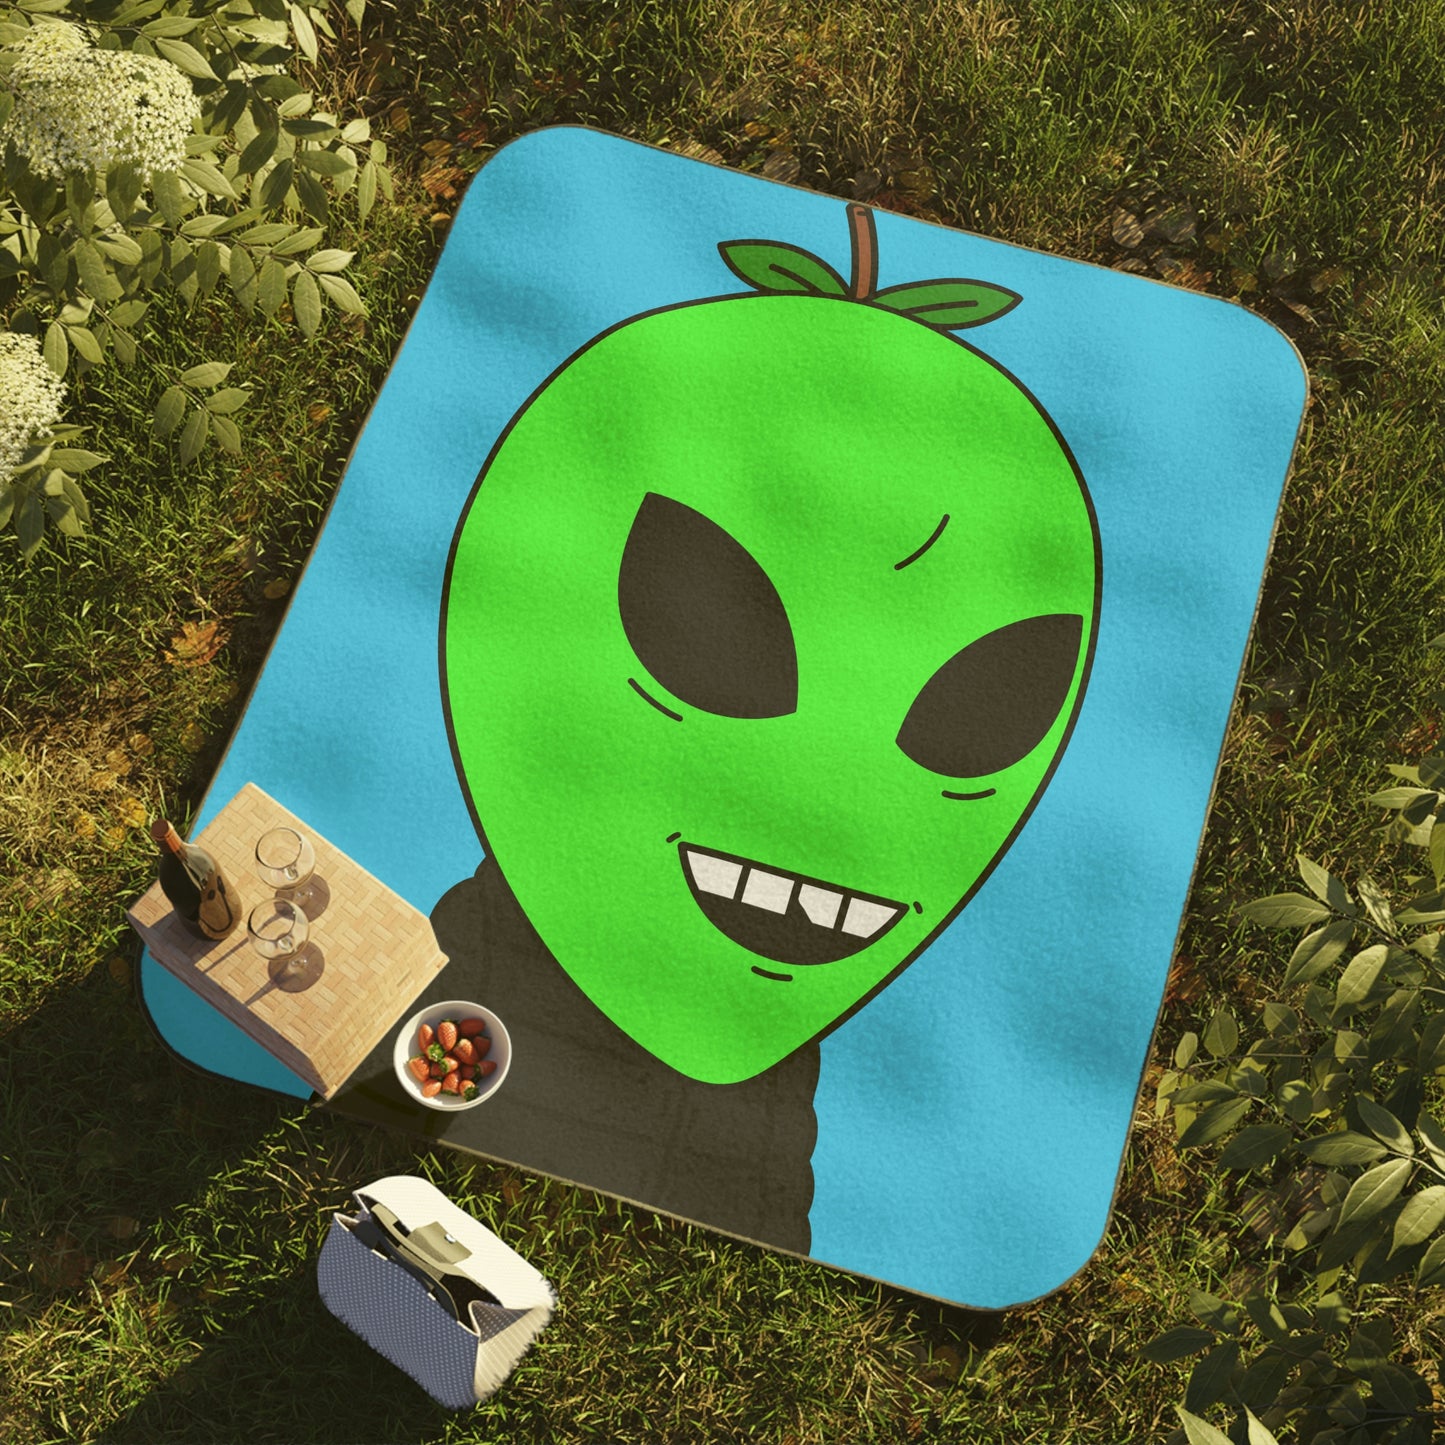 Green Apple Chipped tooth Visitor Smiling Picnic Blanket